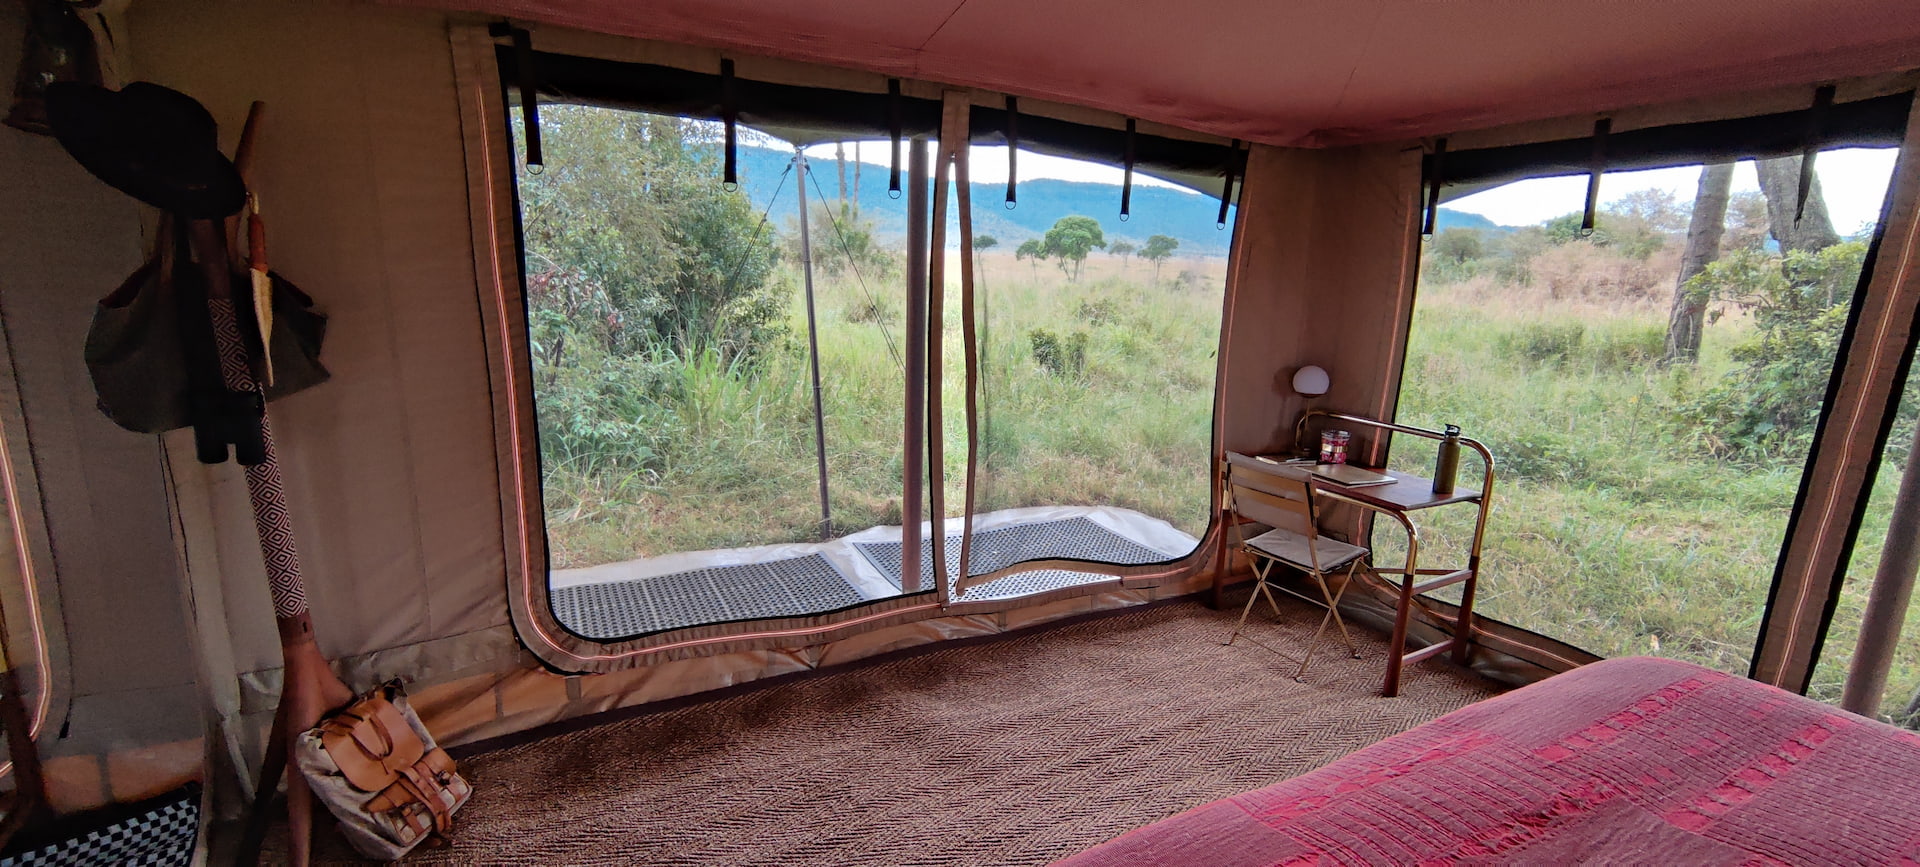 Both uninterrupted privacy and views for each tent